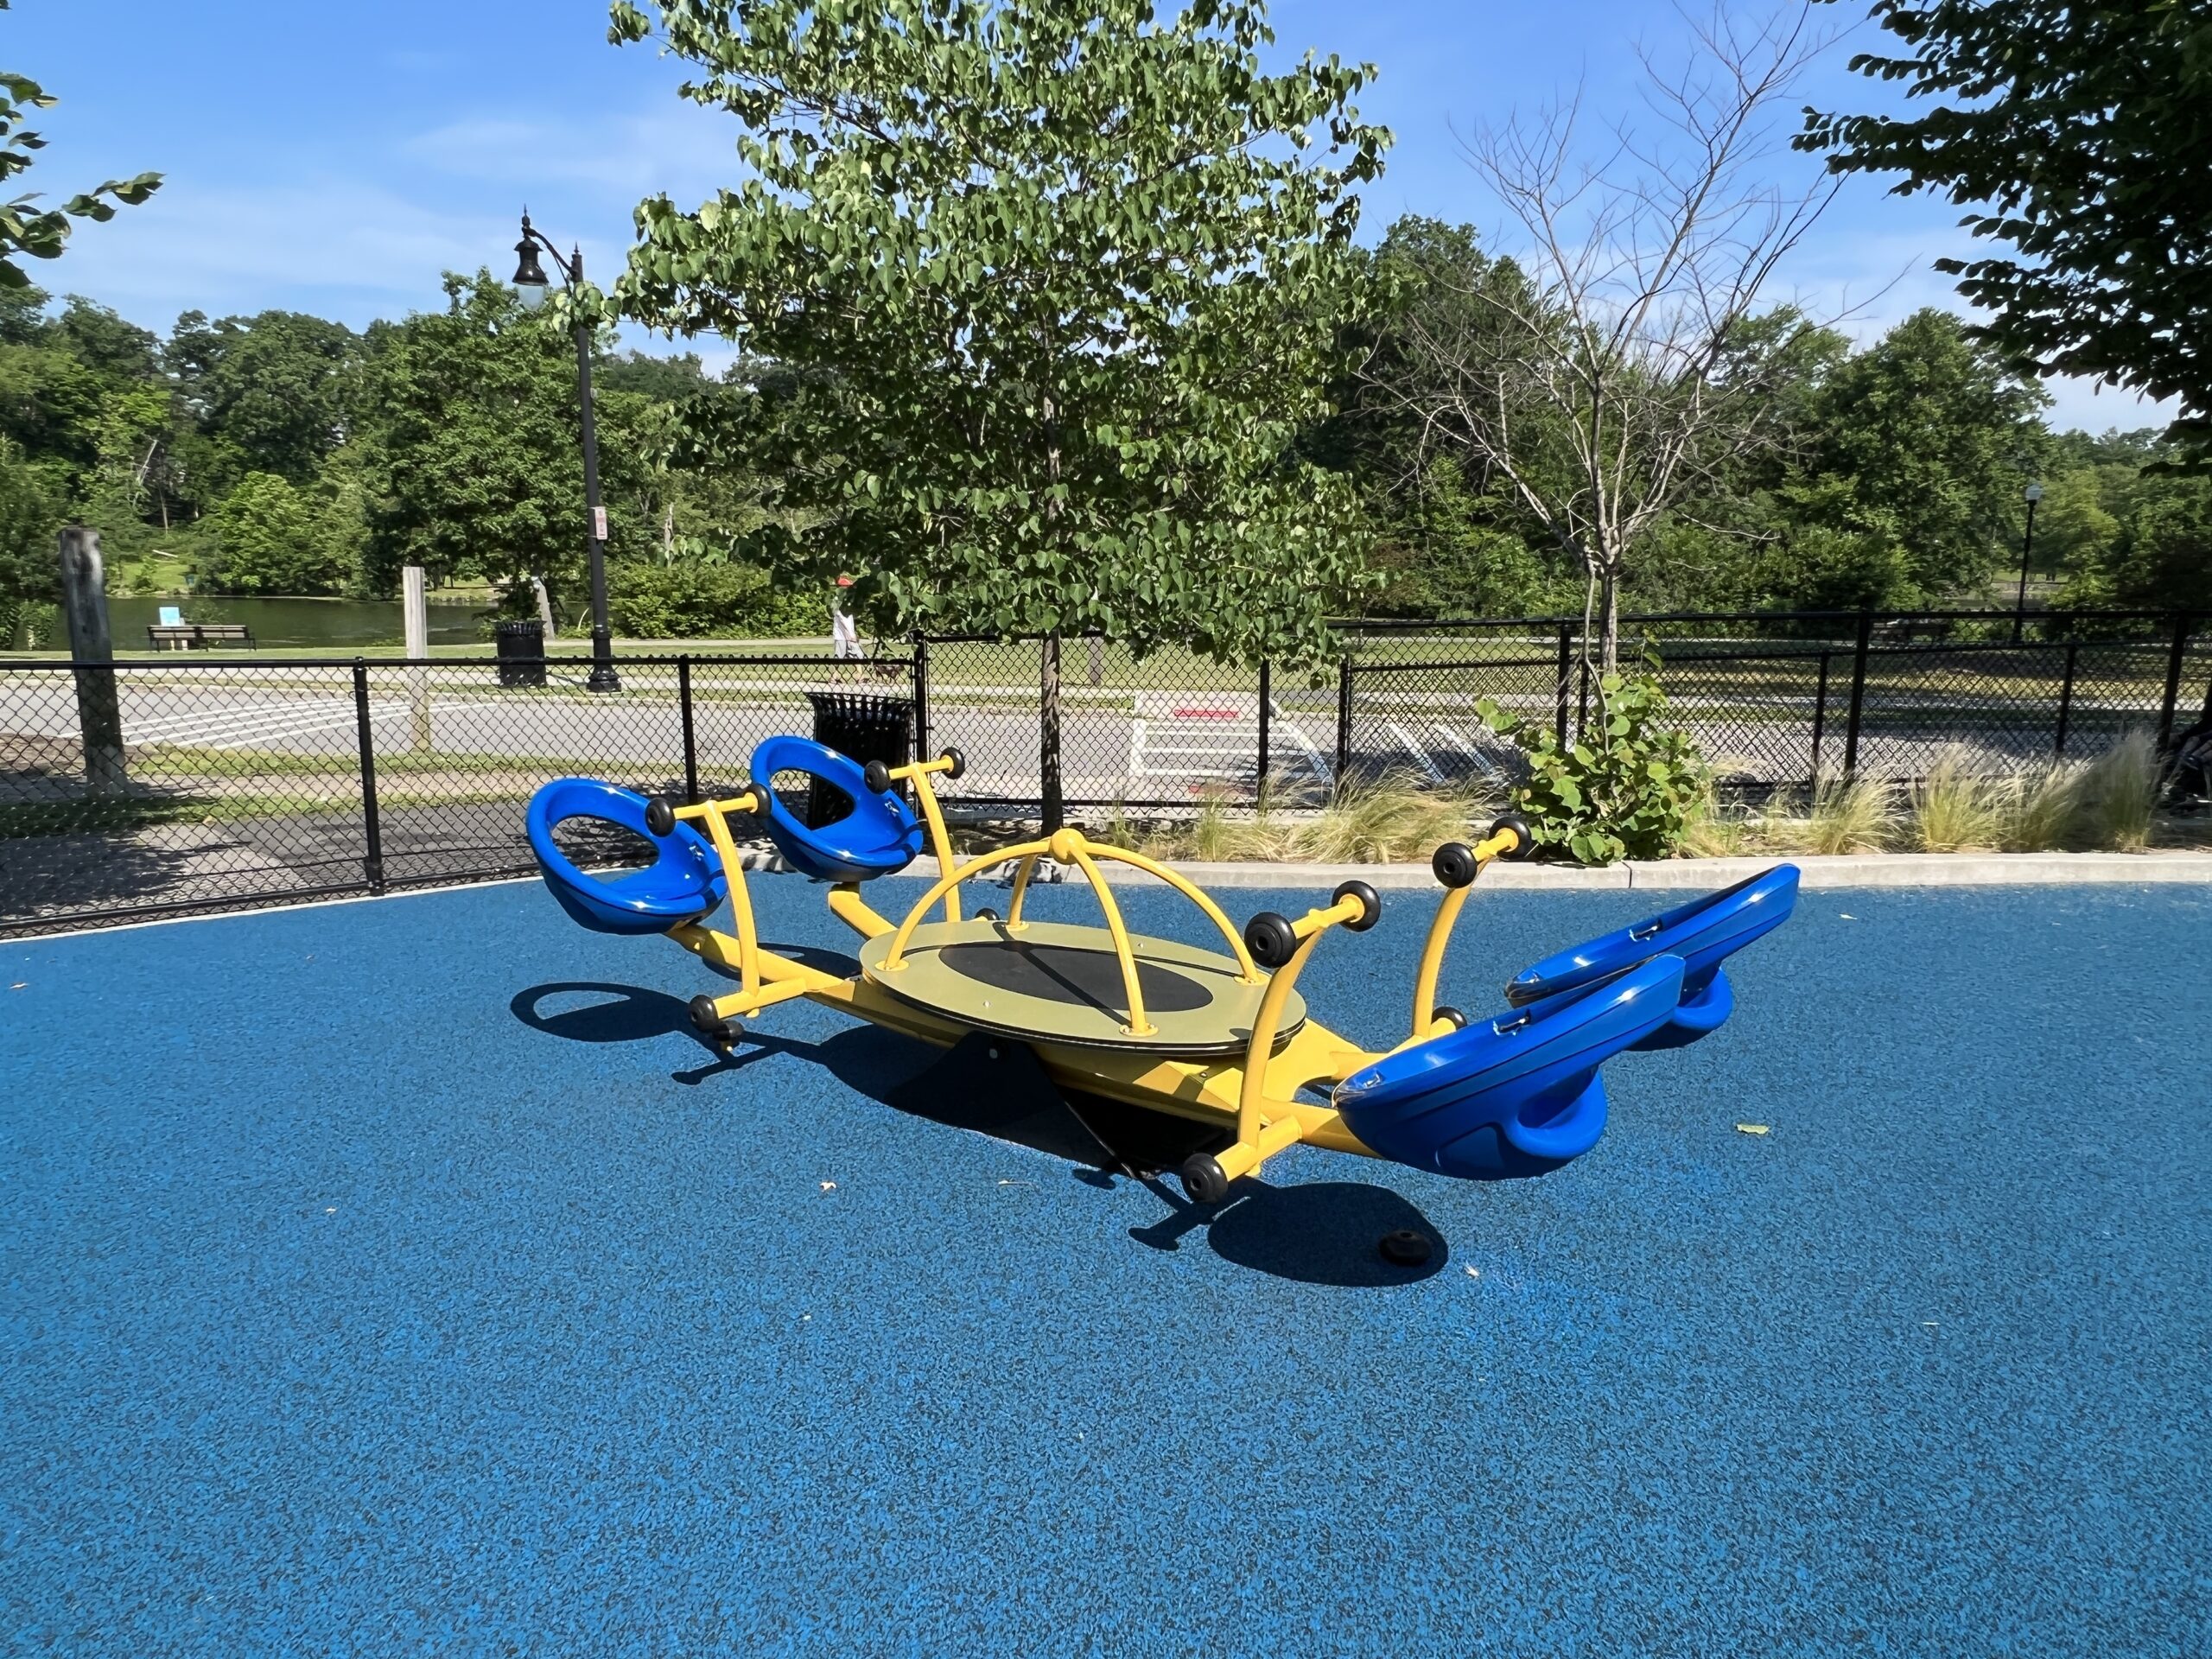 Verona Park Playground in Verona NJ - Features - We Saw 4 person see saw WIDE image